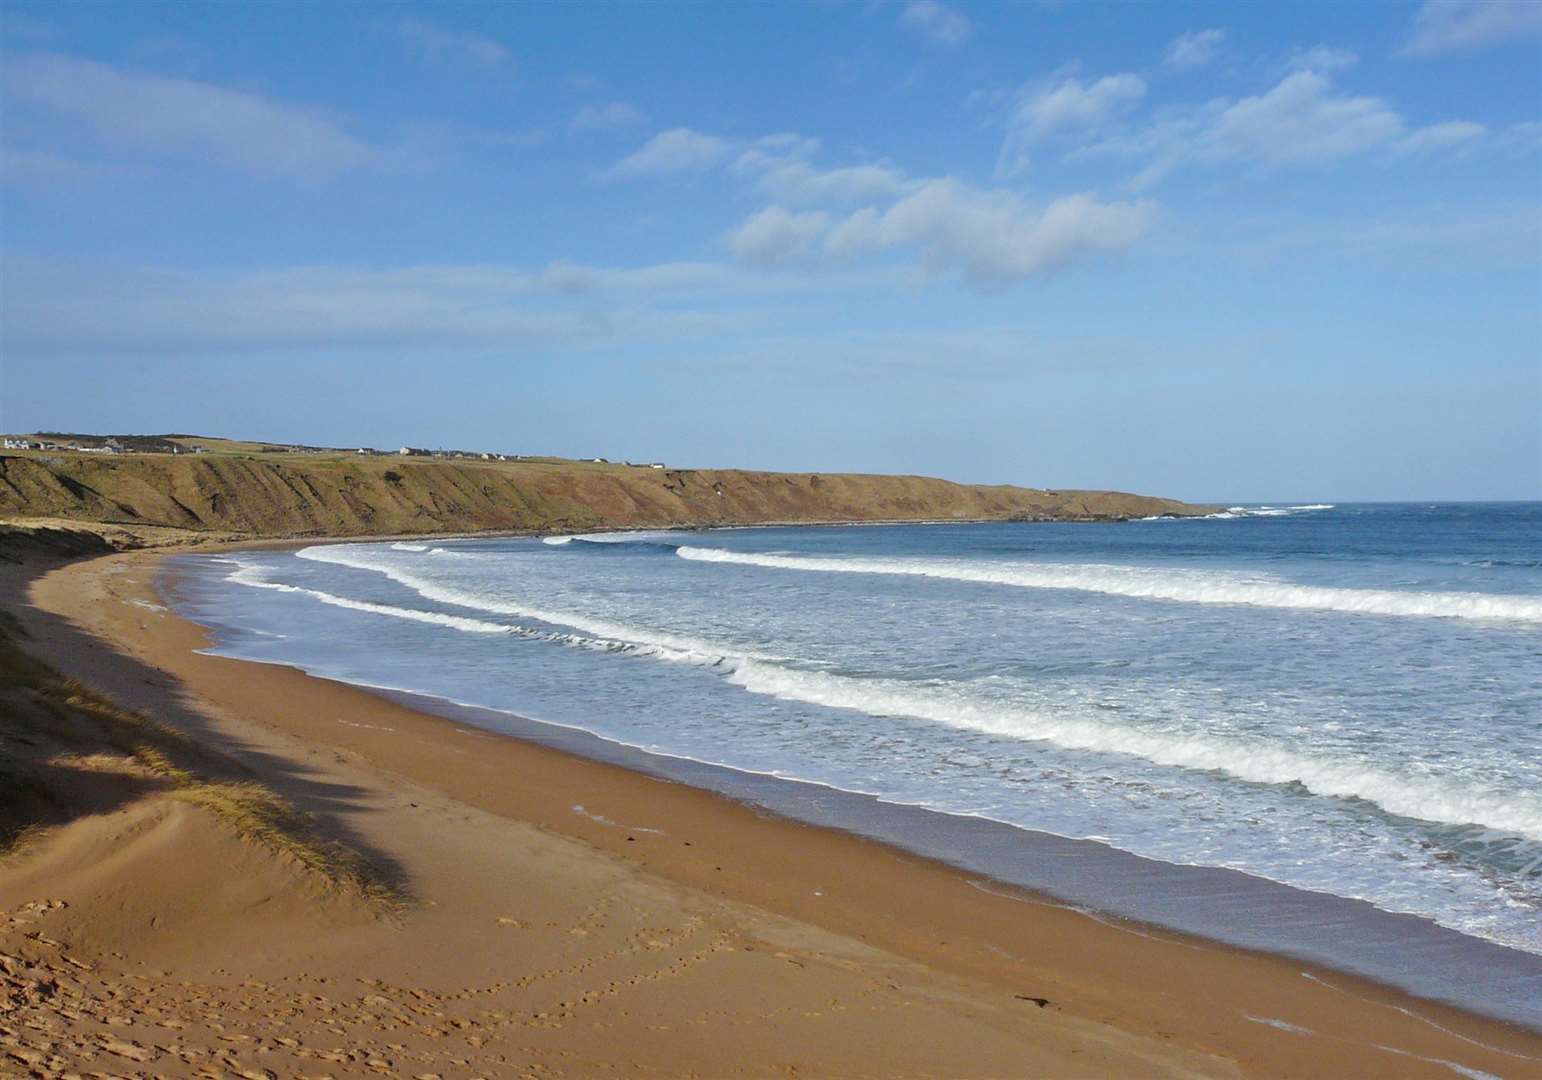 Melvich beach was found to be among the top 10 coastal sites at risk because of climate change.